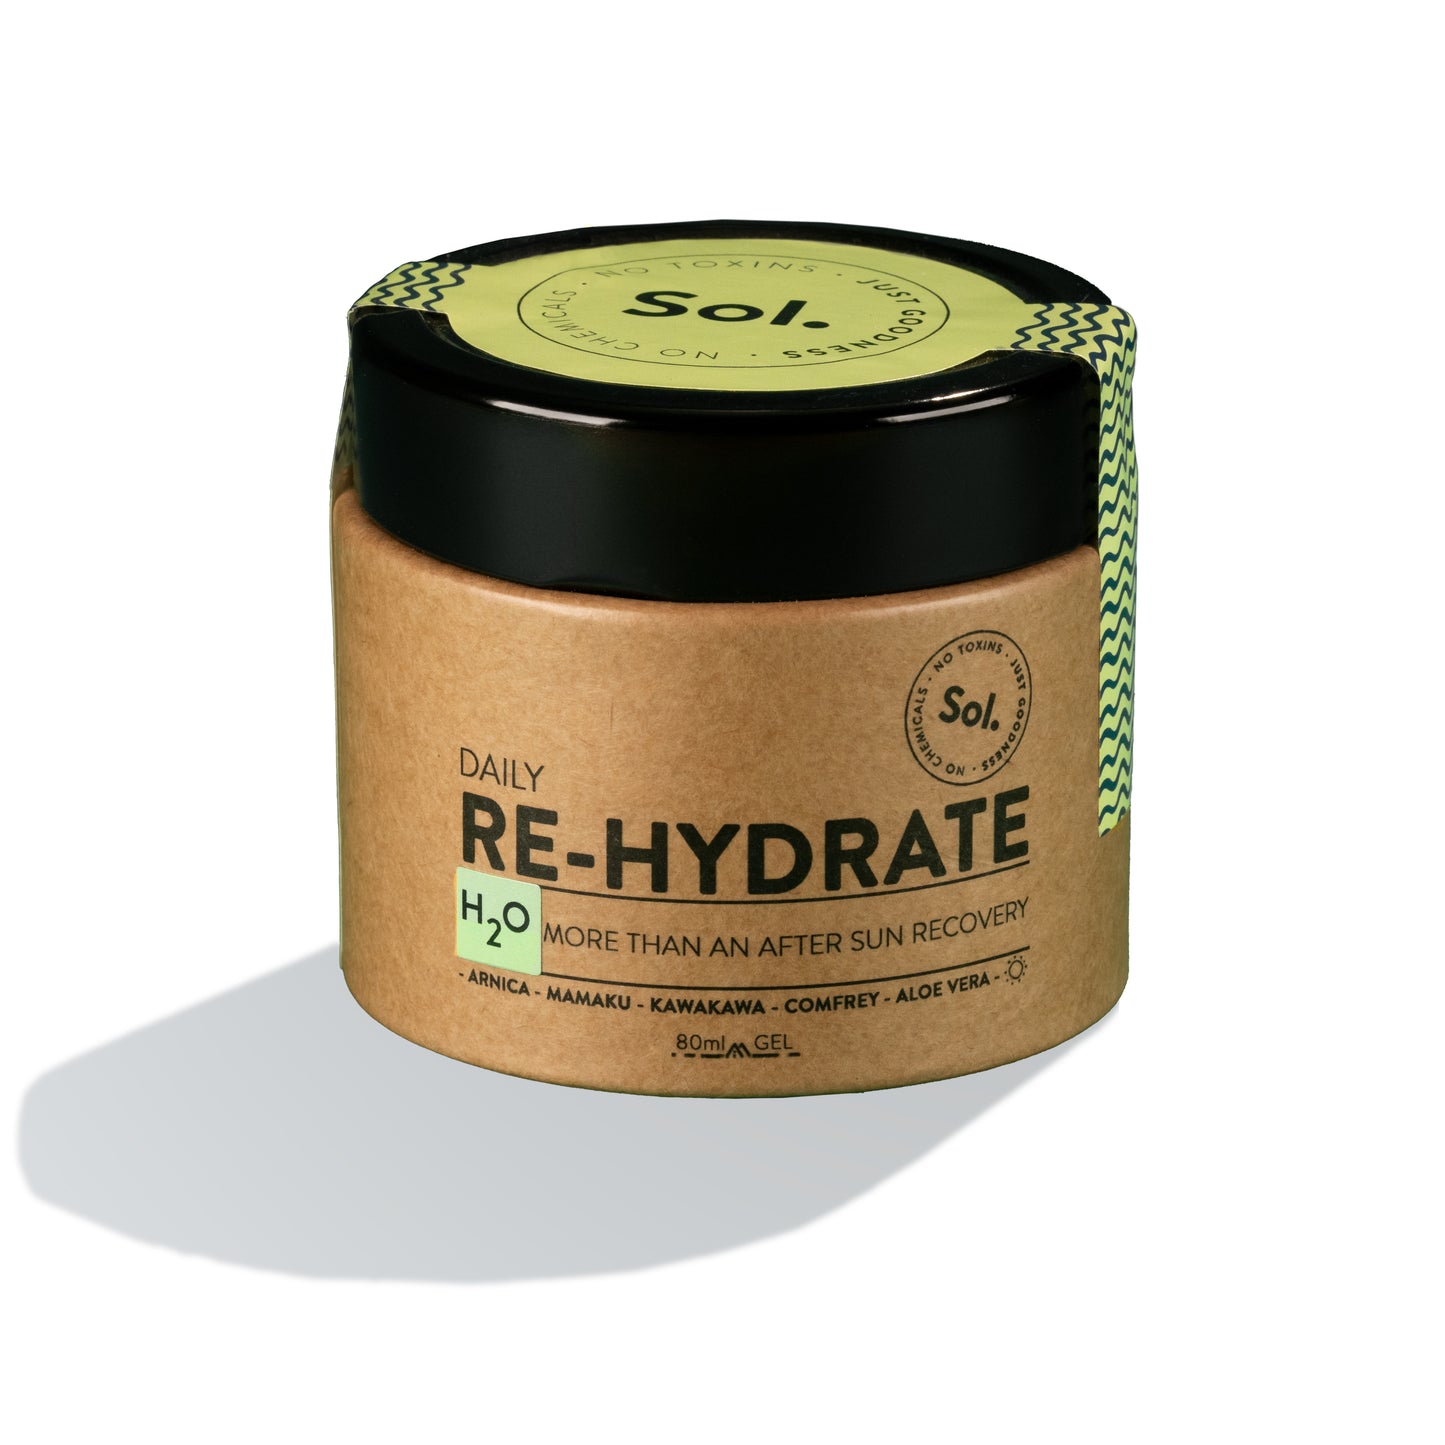 Sol Organic Re-Hydrate Gel is a safe and effective way to nourish and protect your skin from the harsh elements of the sun - ethically, and sustainably.Packed with the highest quality of New Zealand Marine and Land Botanicals. New Zealand Red Seaweed Extract, Mamaku (New Zealand Black Fern), UMF25+ Manuka Honey, Kawakawa (New Zealand Native Tree) are sourced from New Zealand - the heart of the South Pacific Potent and Biodiverse Ecosystem. Traditionally harvested, genetically unchanged.